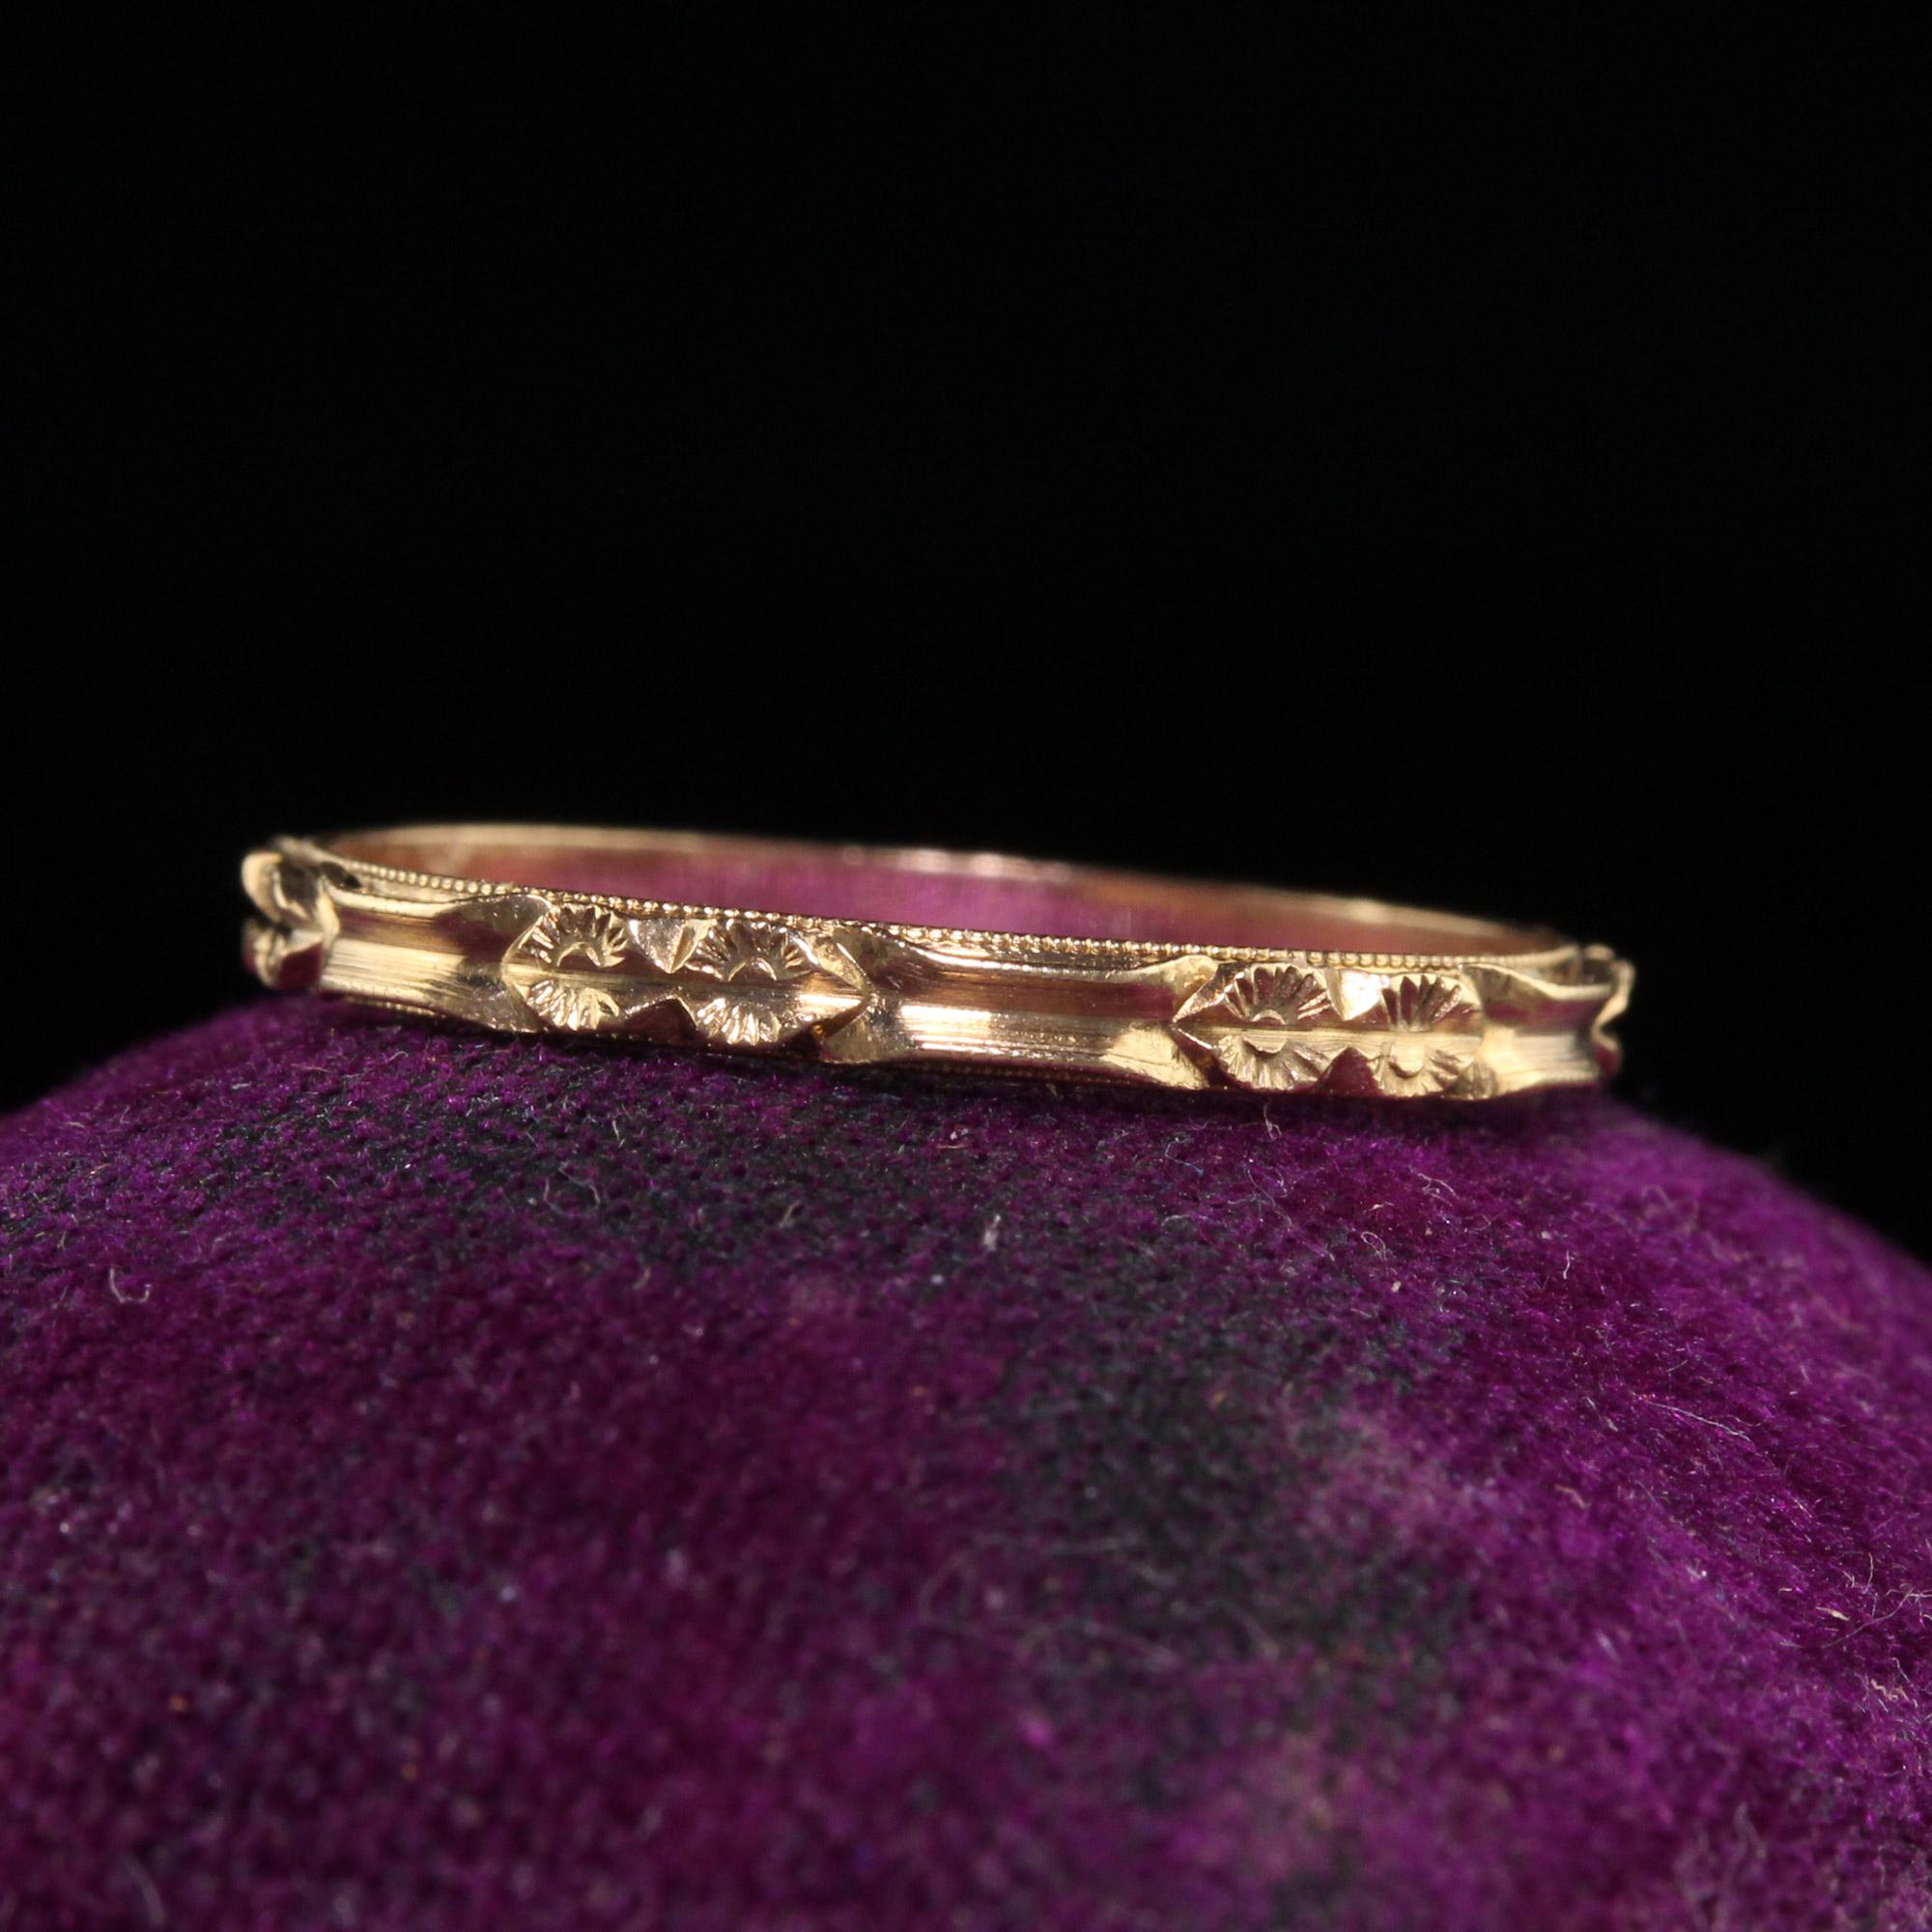 Beautiful Antique Art Deco 14K Yellow Gold Blossom Engraved Wedding Band - Size 7 1/4. This beautiful wedding band is crafted in 14k yellow gold. The ring is in incredible condition with crisp engravings going around the entire ring. The ring sits